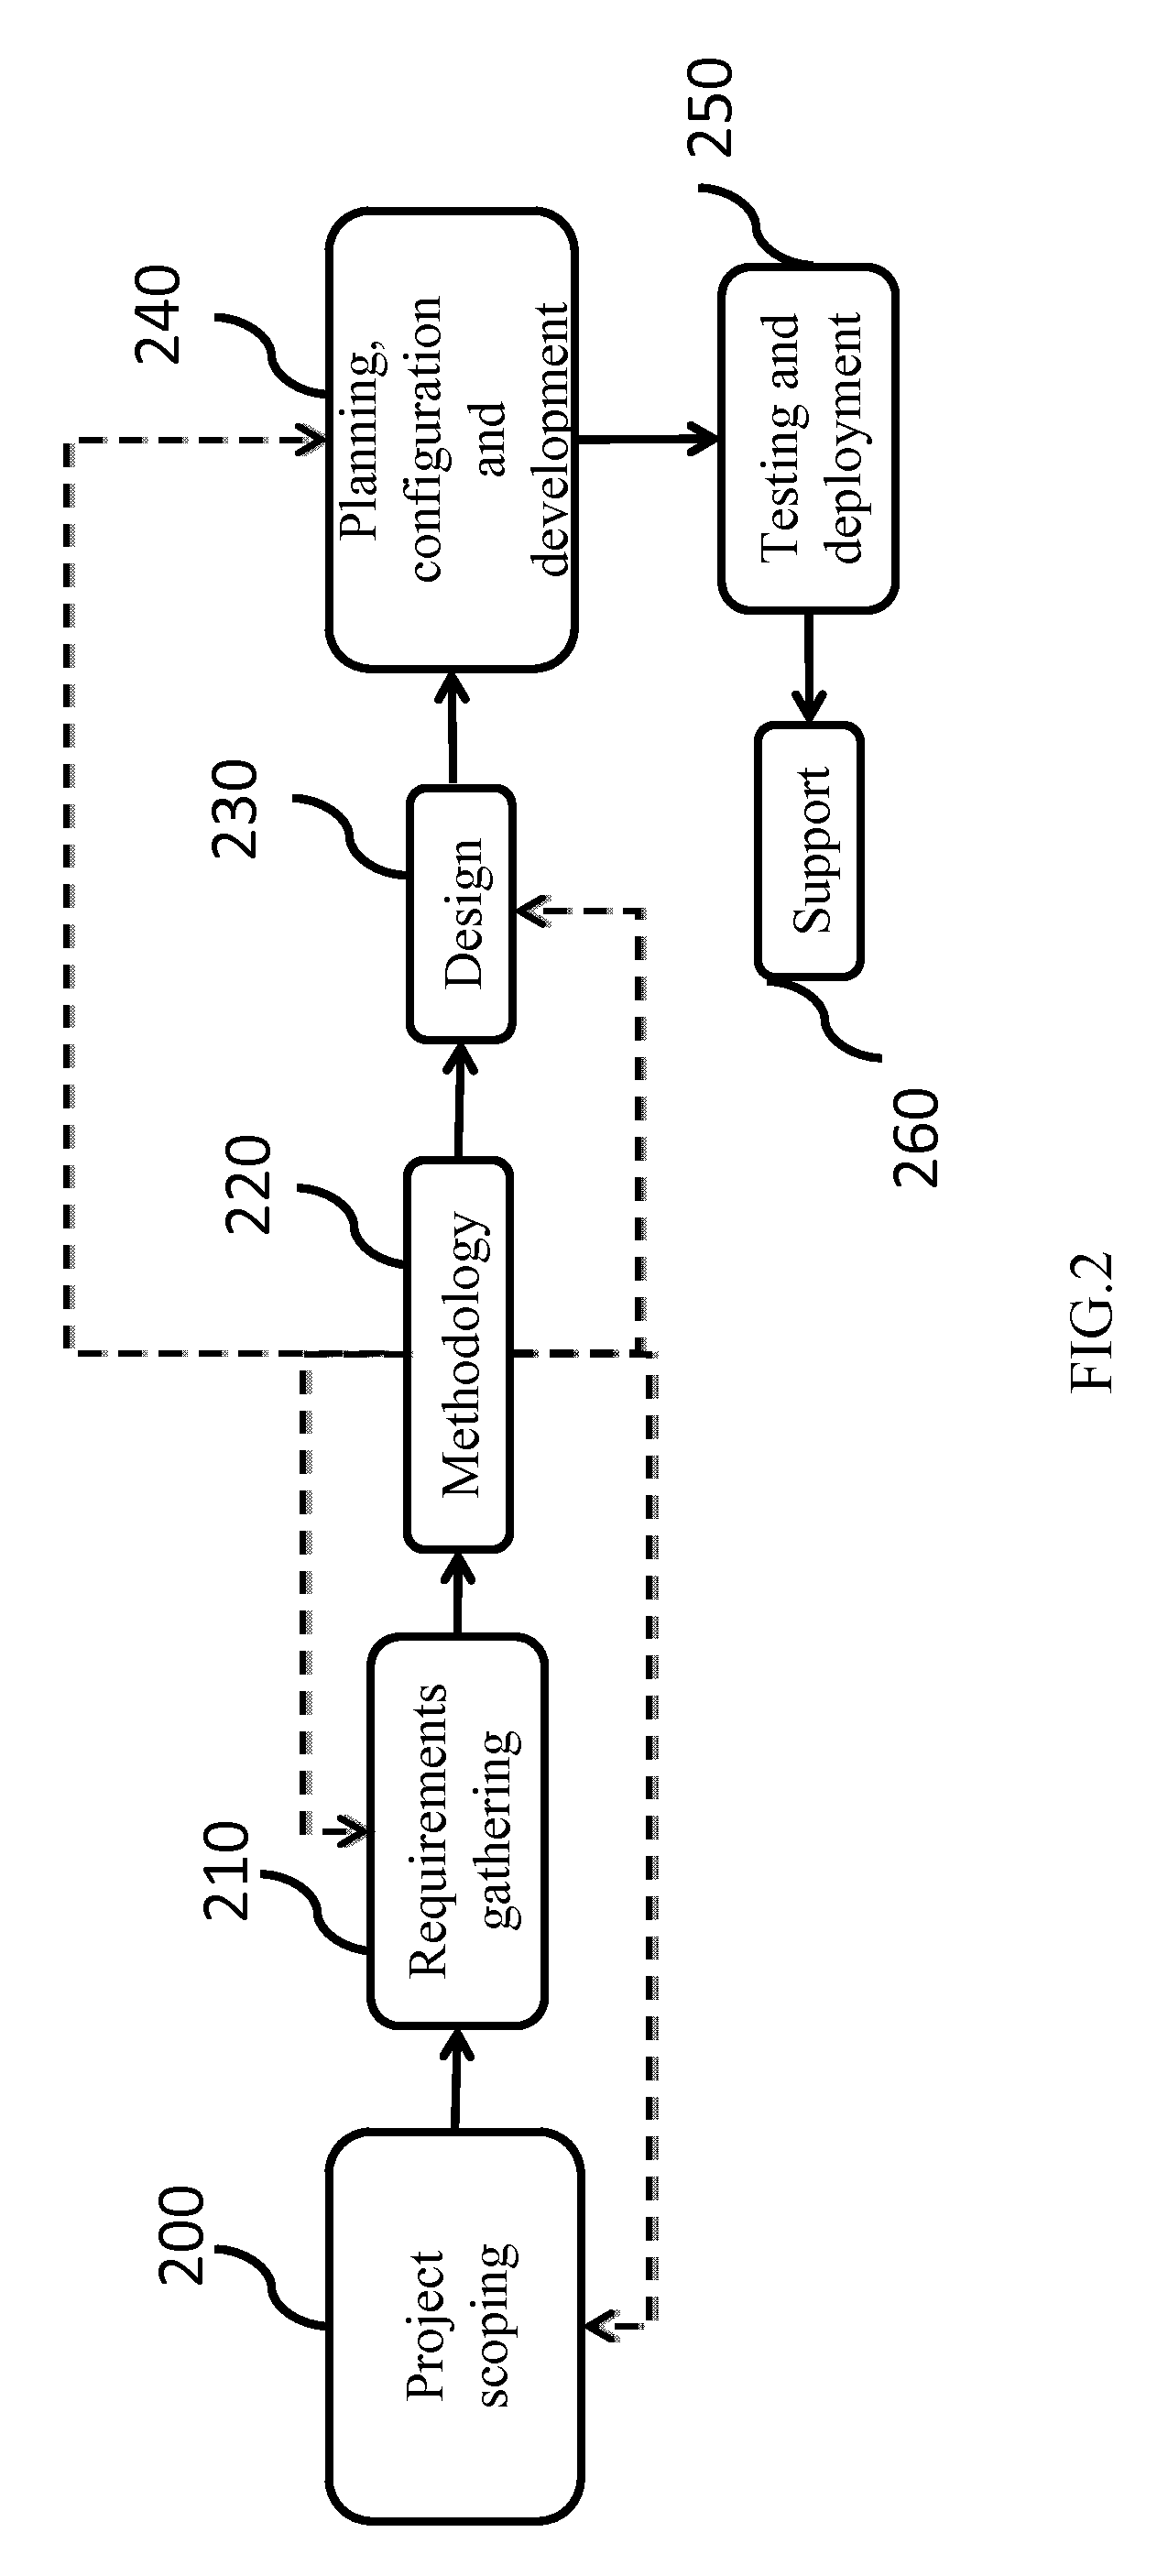 Method for improving execution efficiency of a software package customization